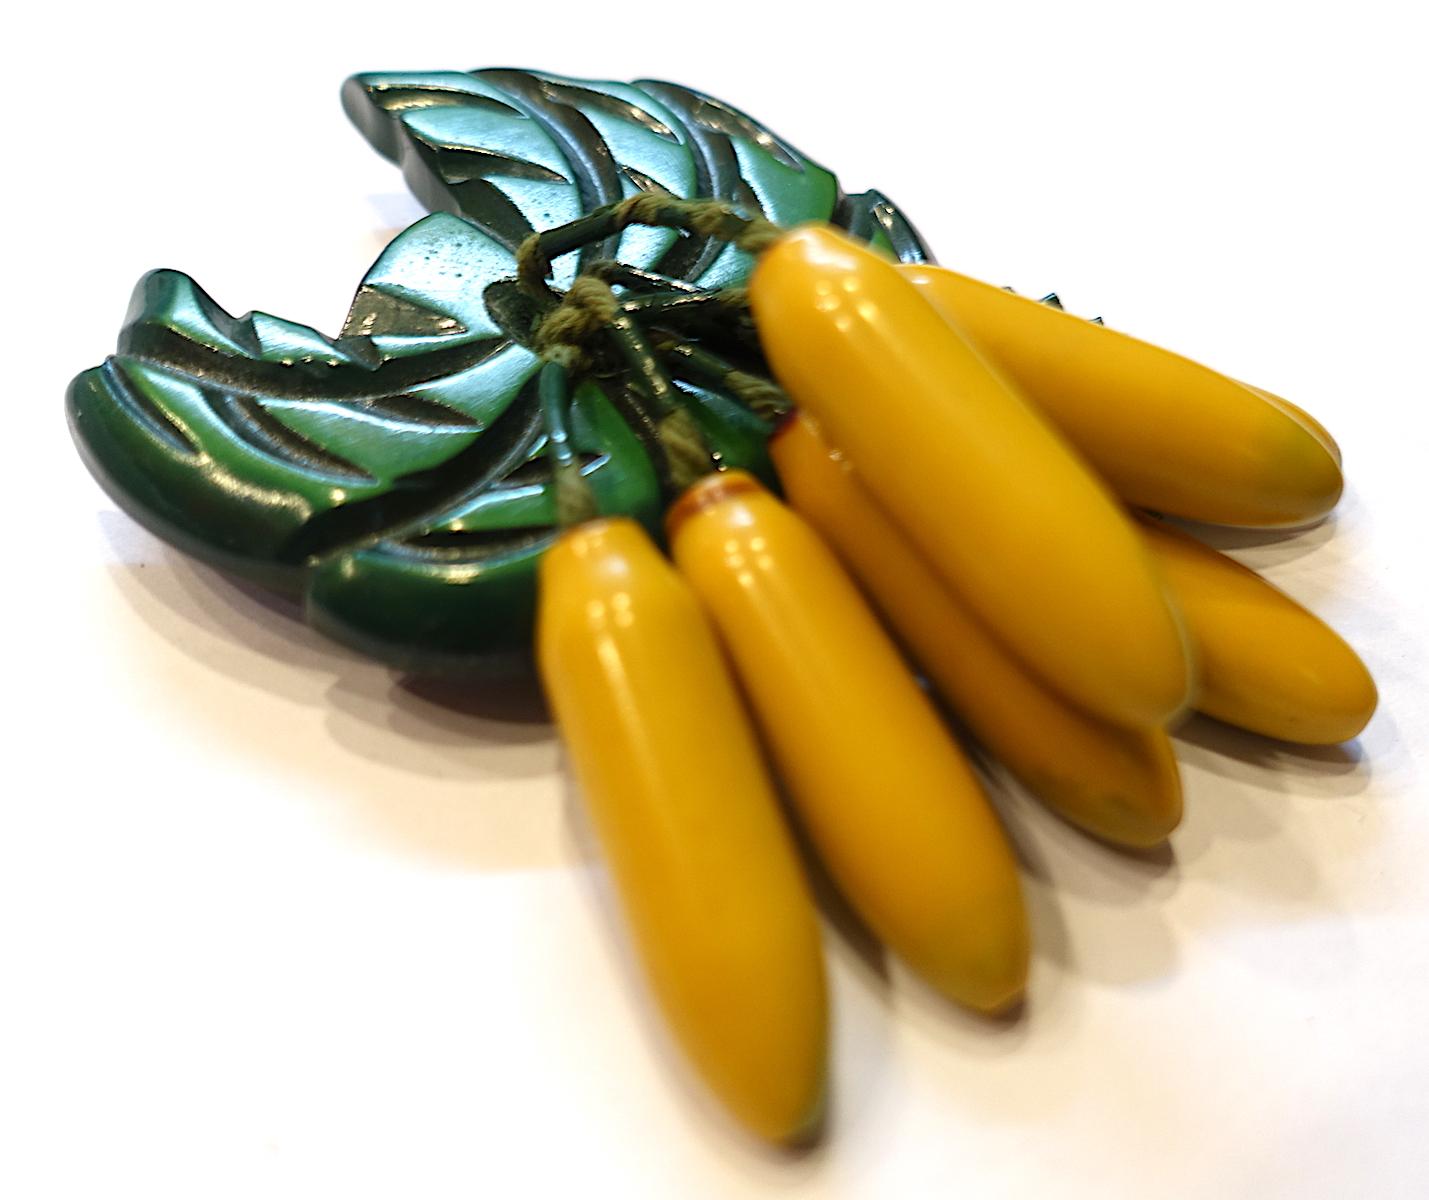 This famous  vintage Art Deco Bakelite brooch features 7 bananas suspended by green bakelite leaves. In excellent condition, this brooch measures 3-1/4” x 2-1/4” and has a c-pin clasp.